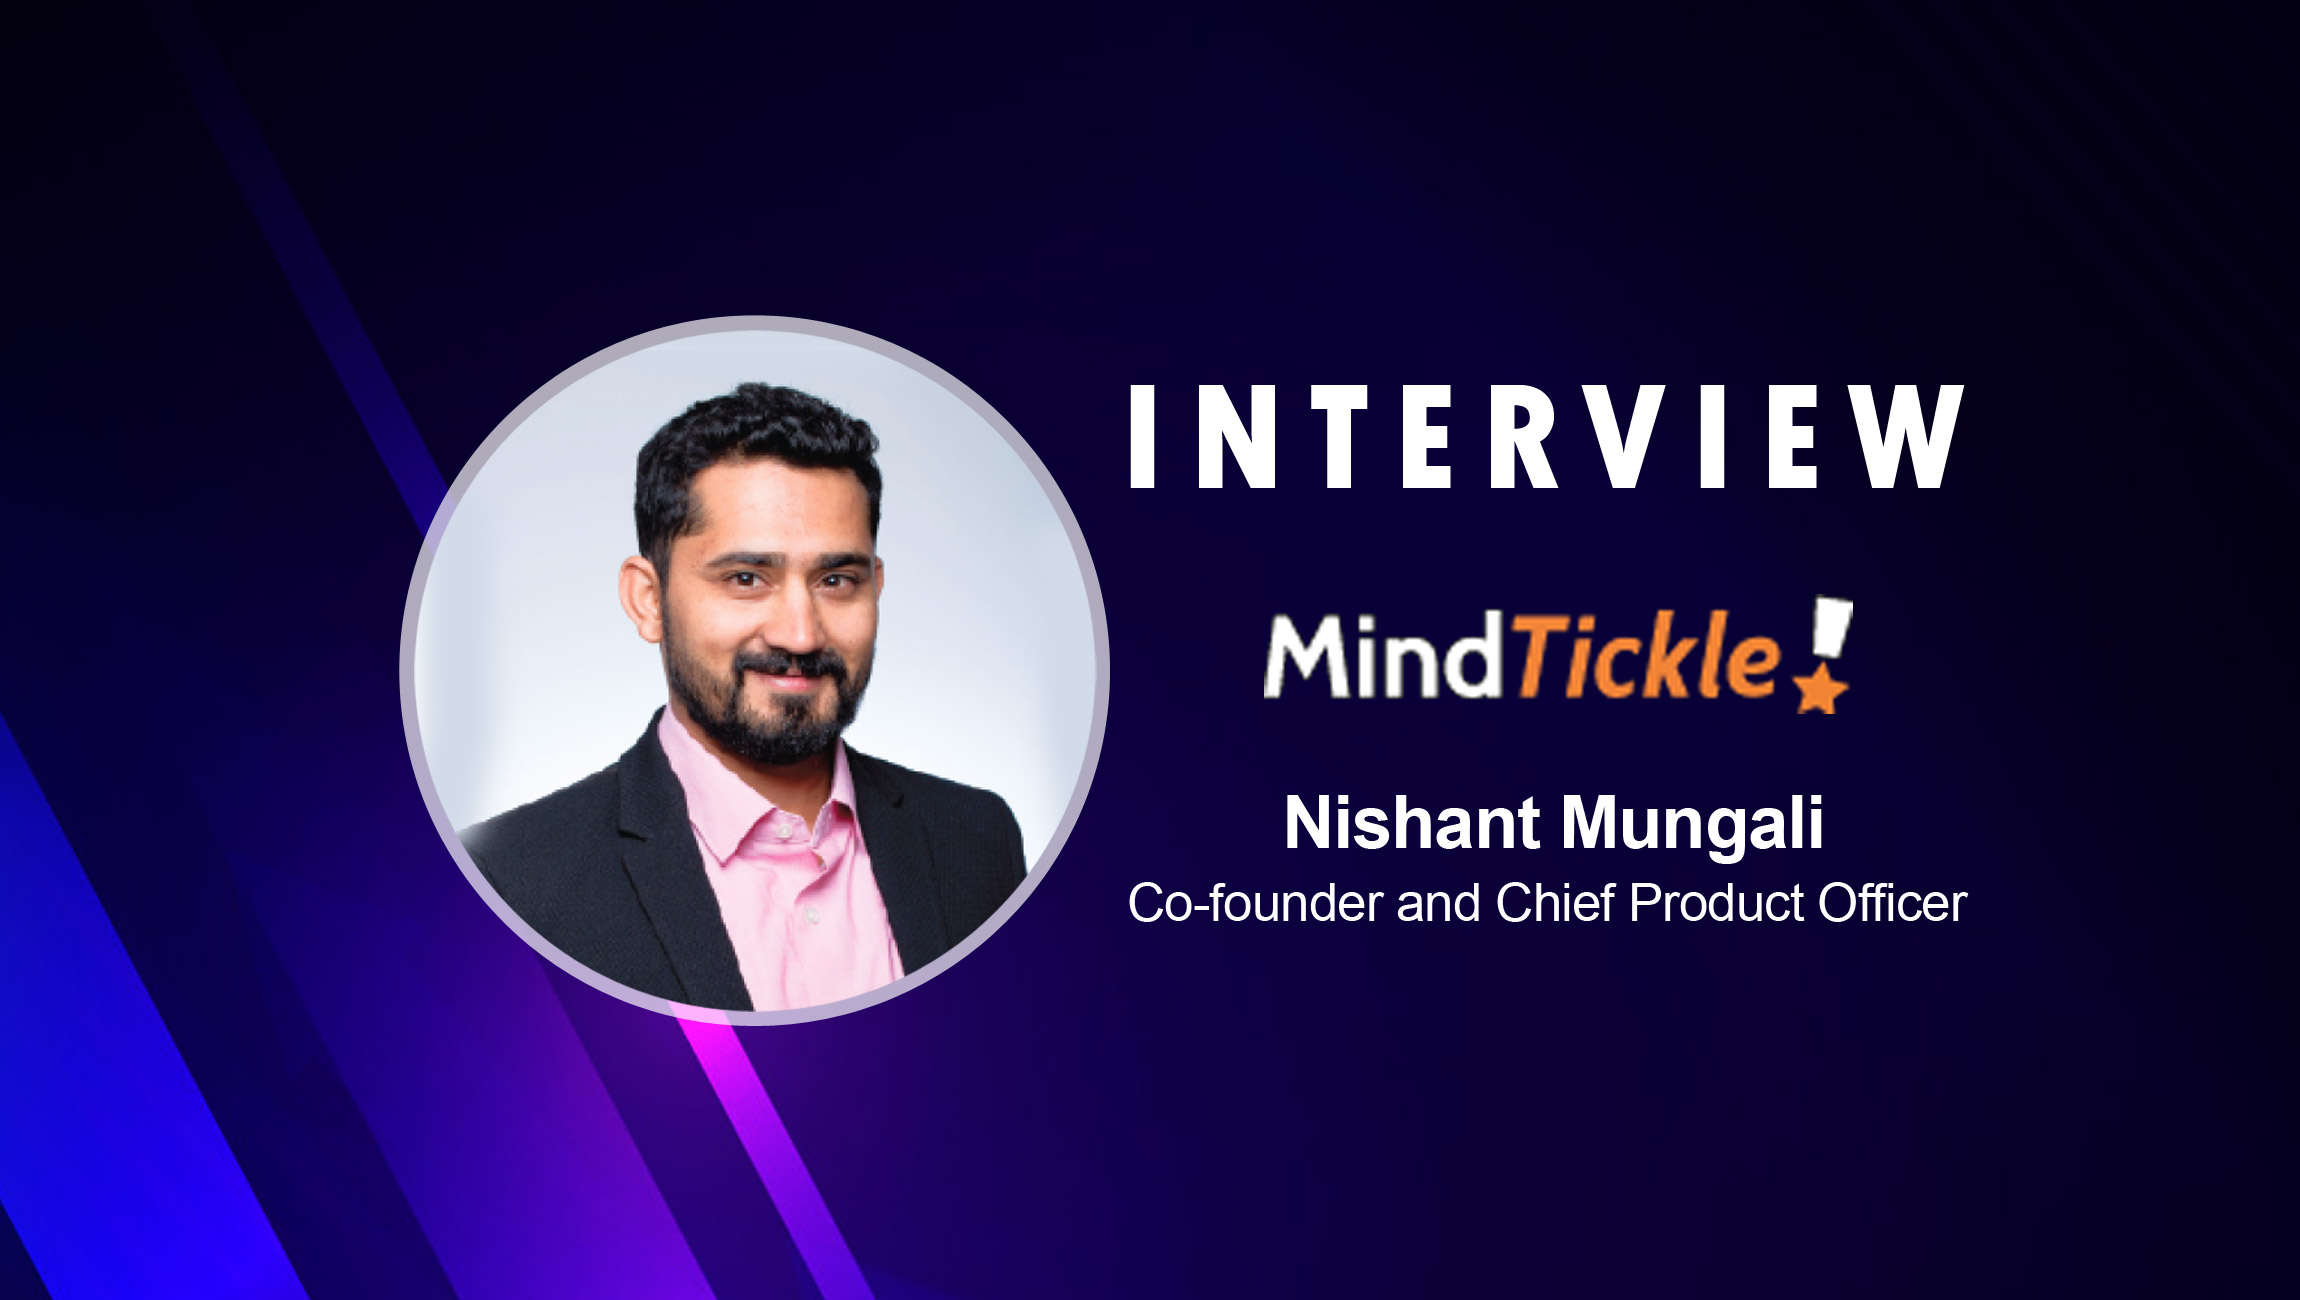 SalesTechStar Interview with Nishant Mungali, Co-founder and Chief Product Officer at MindTickle